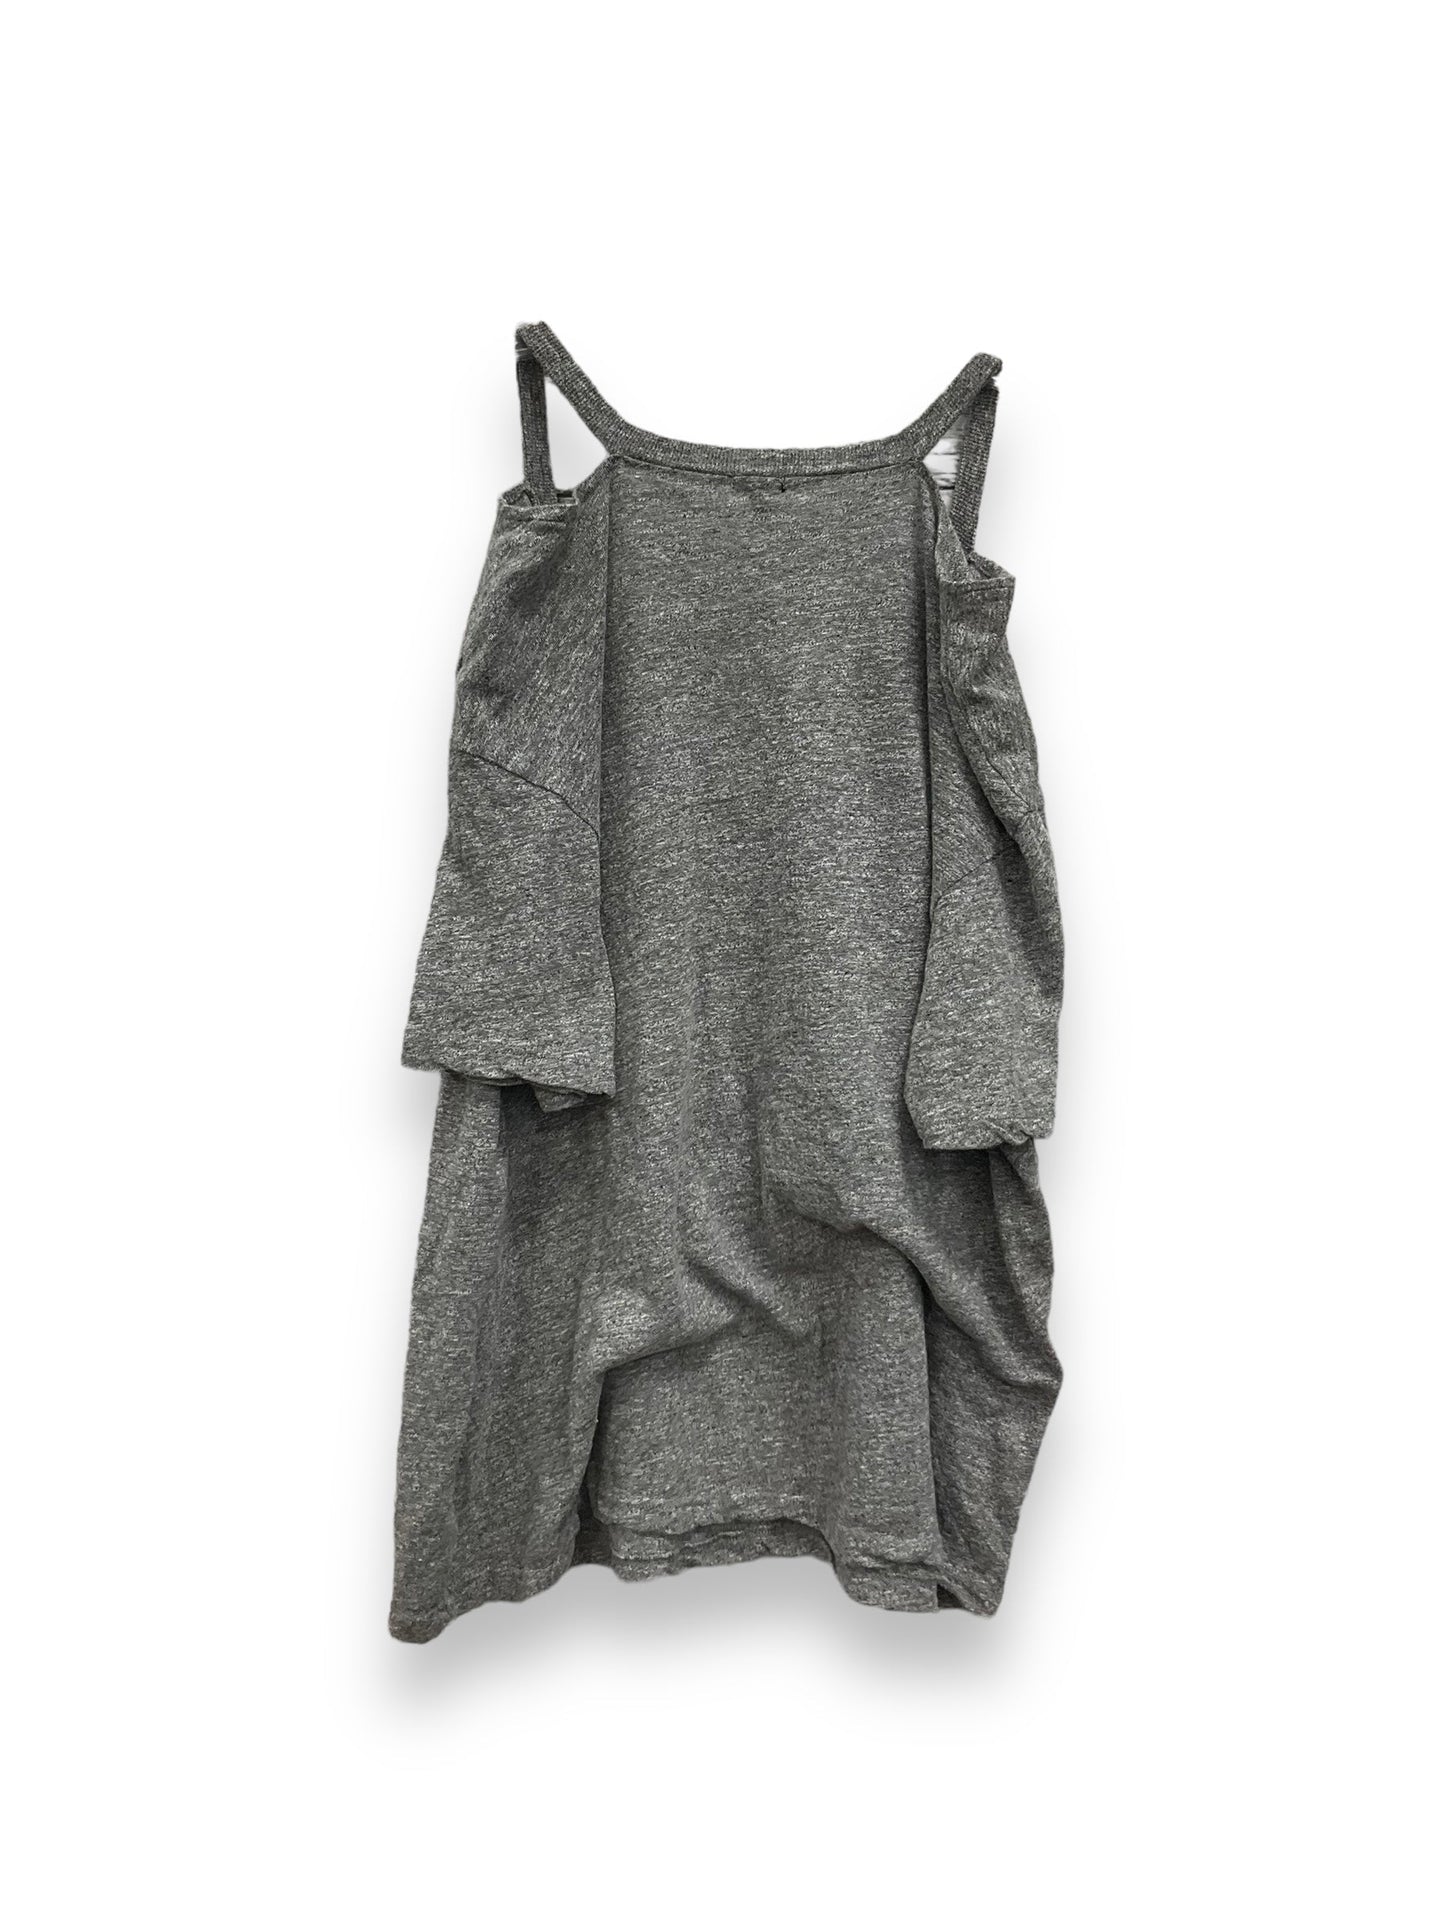 Grey Top Short Sleeve Cmb, Size S